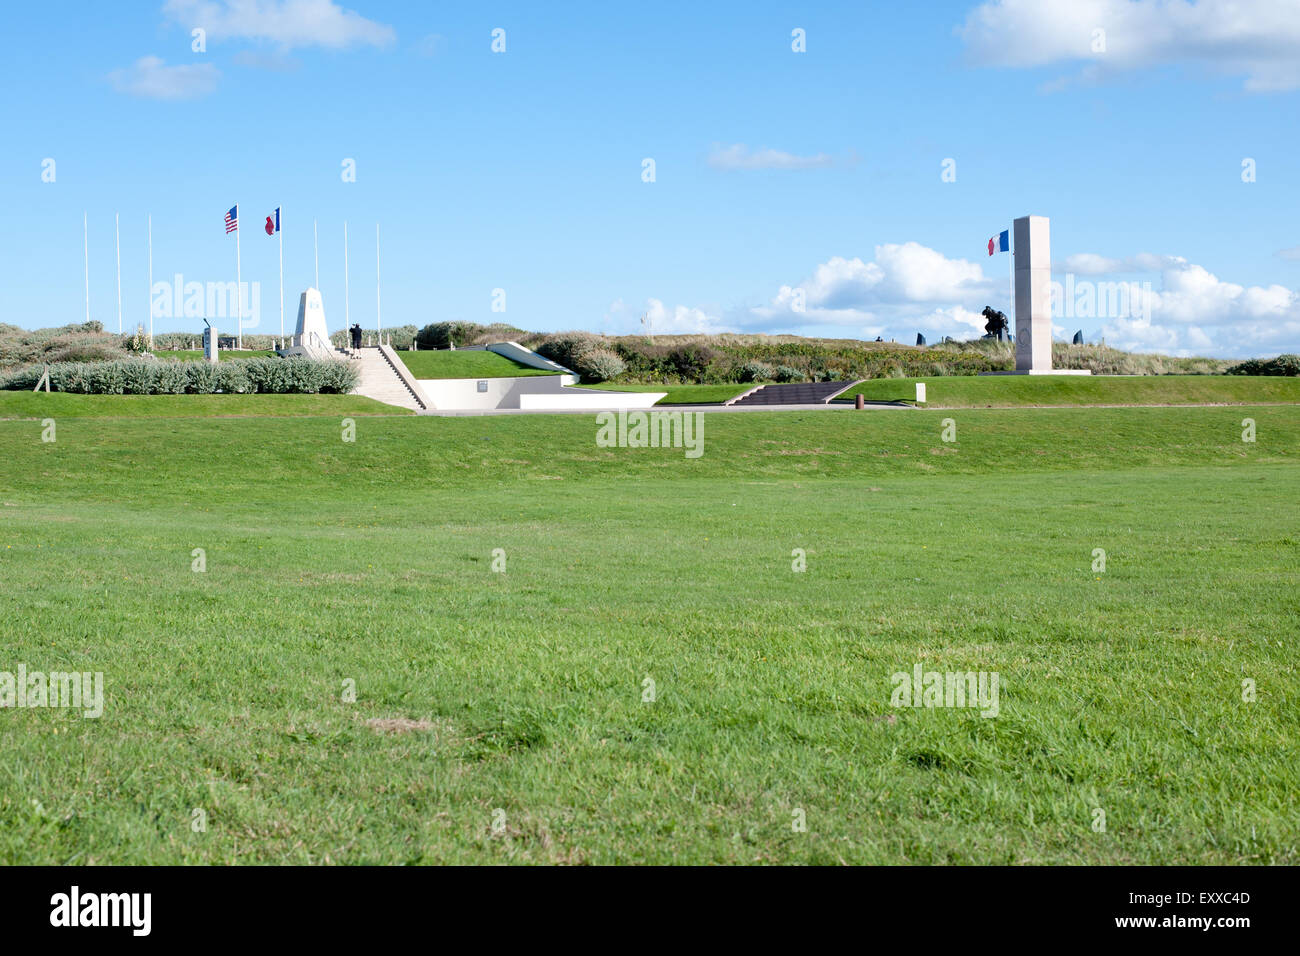 The Utah Beach D-Day Museum, Normandy, France.This beach was one of the D-Day landing sites during World War II. Stock Photo